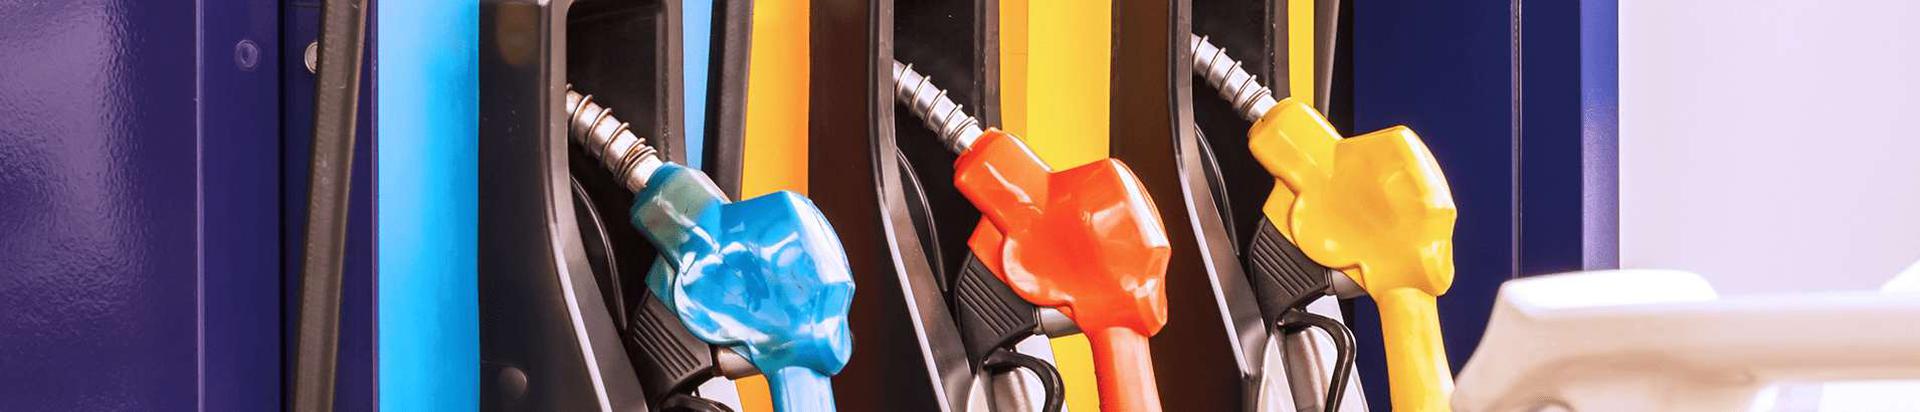 gas stations and filling stations, fuels, Trade, Liquid fuel, Sale of fuel, trade and services